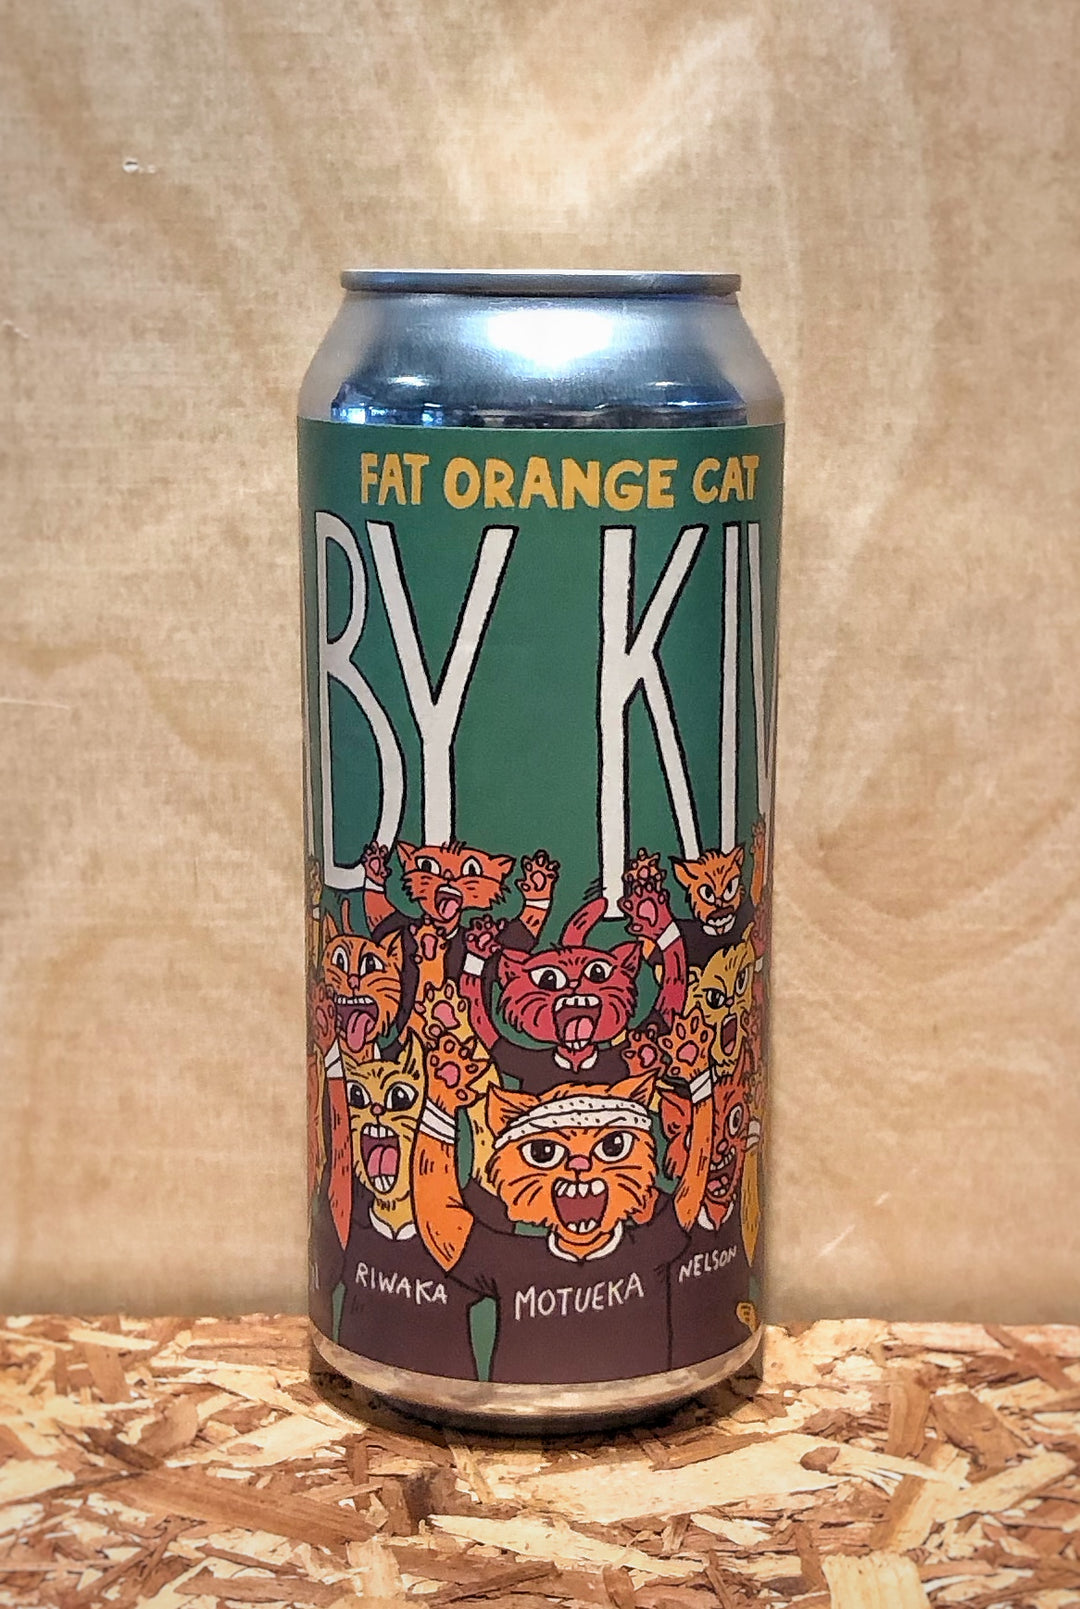 Fat Orange Cat 'Baby Kiwis' Dry-Hopped India Pale Ale brewed with New Zealand Hops (North Haven, CT)